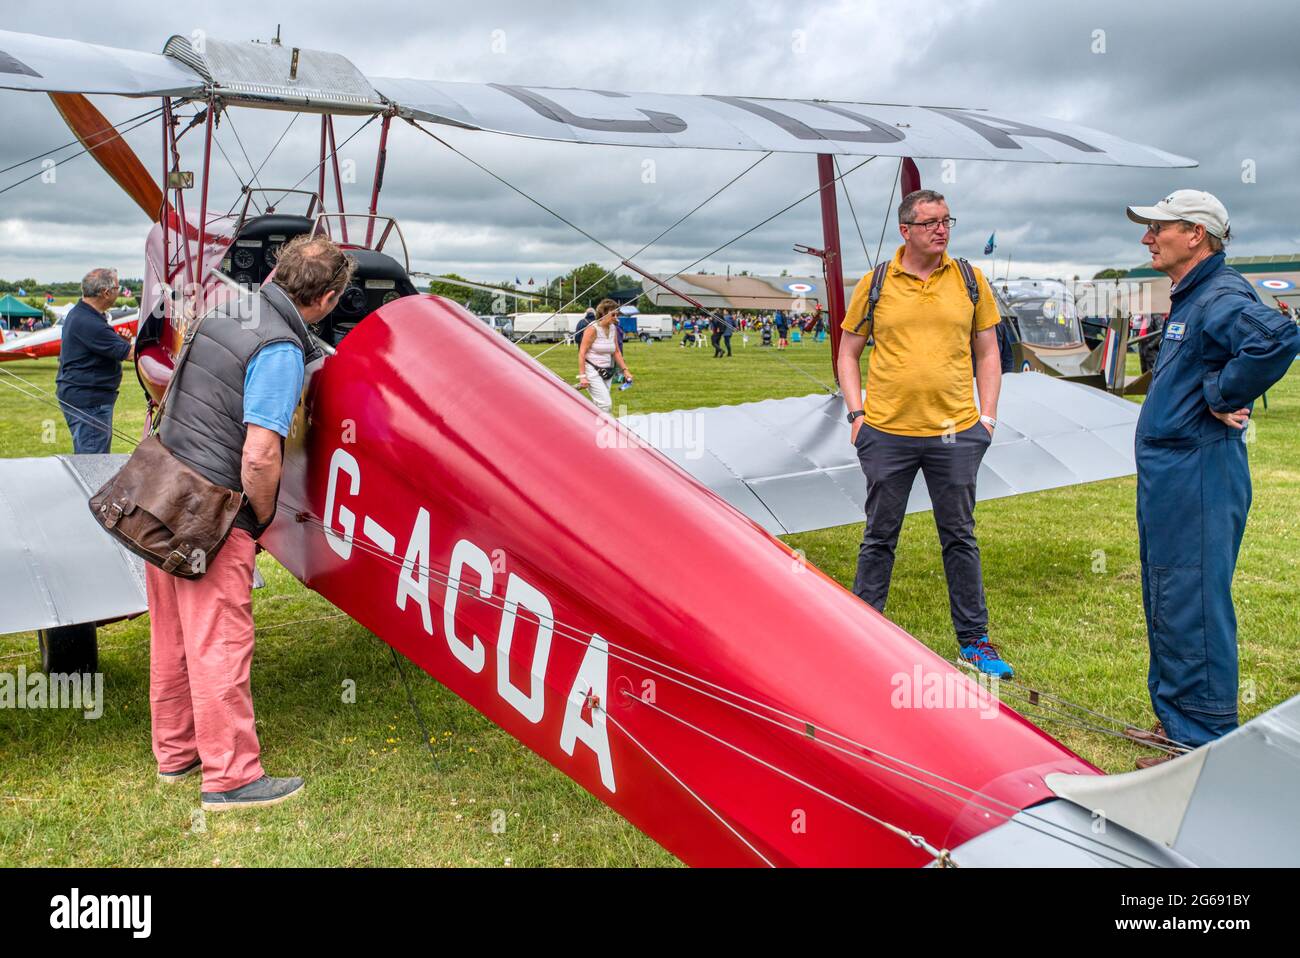 Aviation enthusiast inspect a red 1933 de Havilland Tiger Moth at the Middle Wallop Wheels and Wings airshow in Hampshire, UK Stock Photo